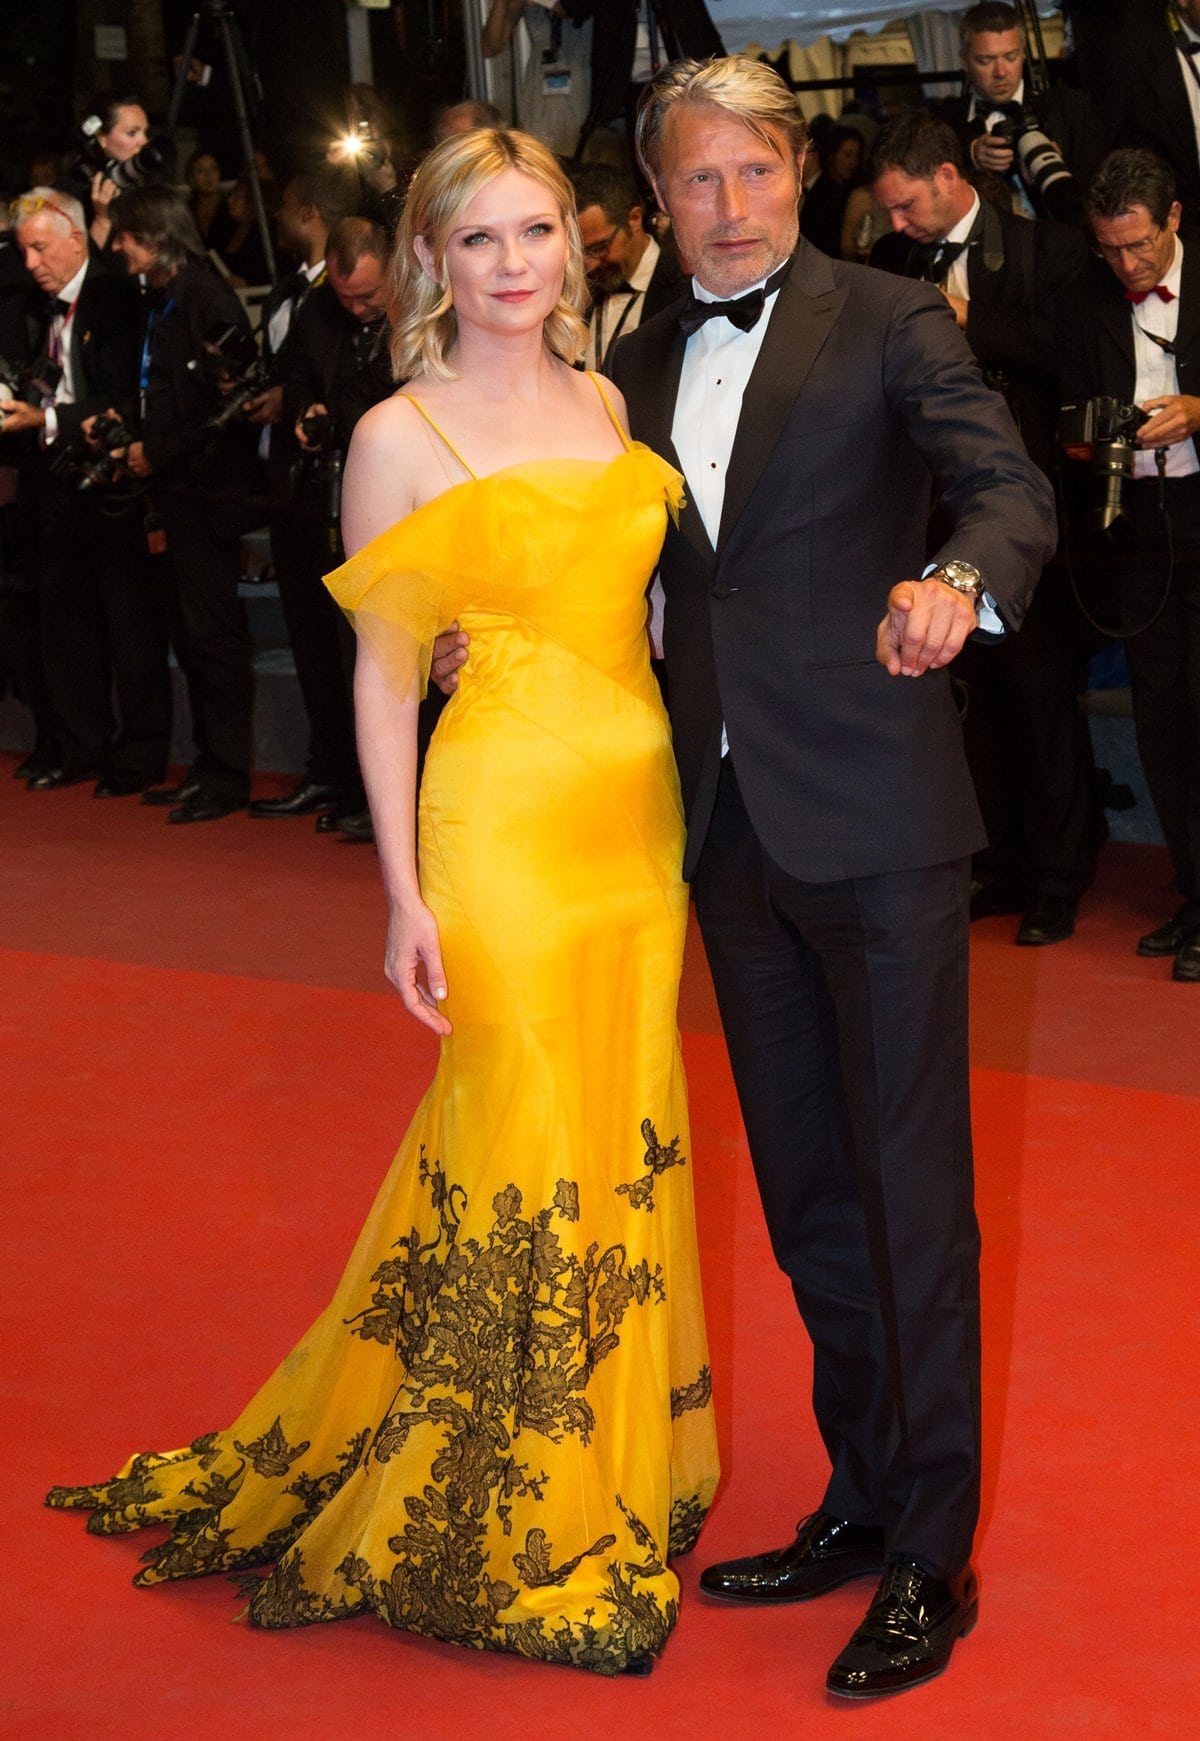 Mads Mikkelsen with Kirsten Dunst in a custom Maison Margiela by John Galliano marigold satin and tulle overlay gown featuring leaf detailing at 'The Neon Demon' premiere